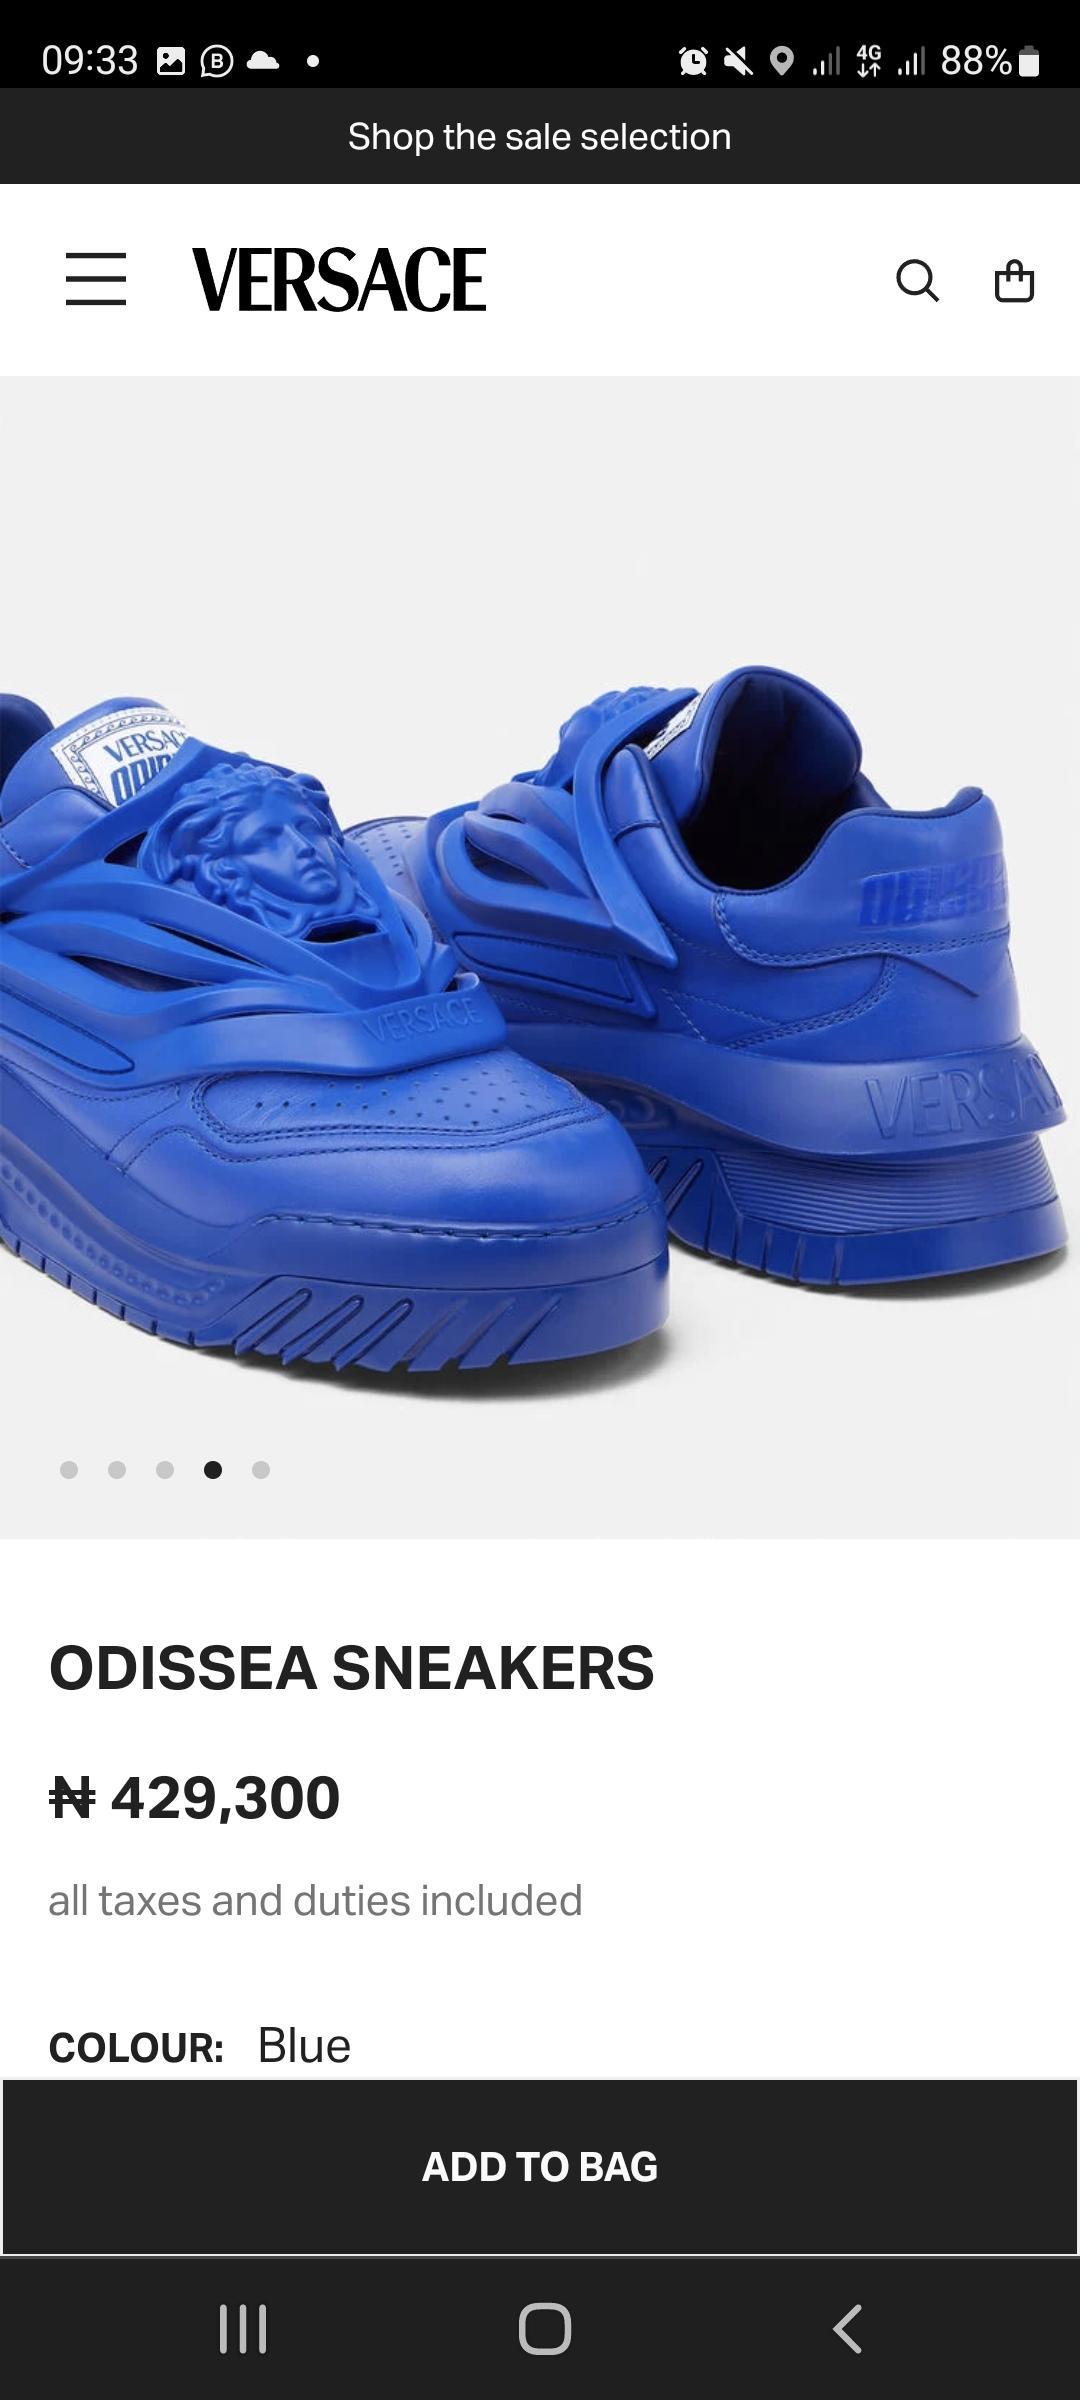 Have You Seen The New Versace ODISSEA SNEAKERS Costs Over 400k ...